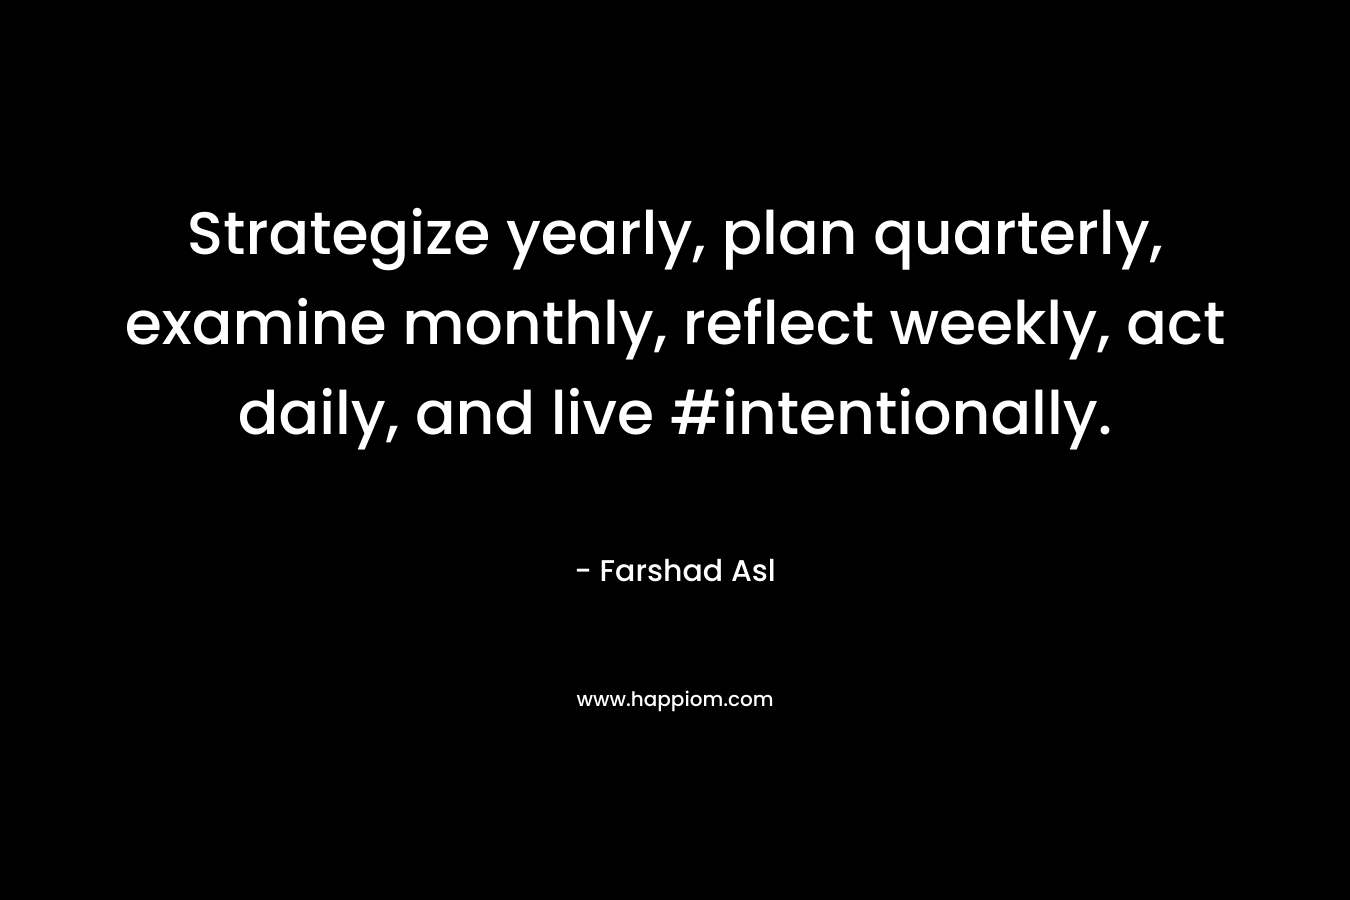 Strategize yearly, plan quarterly, examine monthly, reflect weekly, act daily, and live #intentionally.